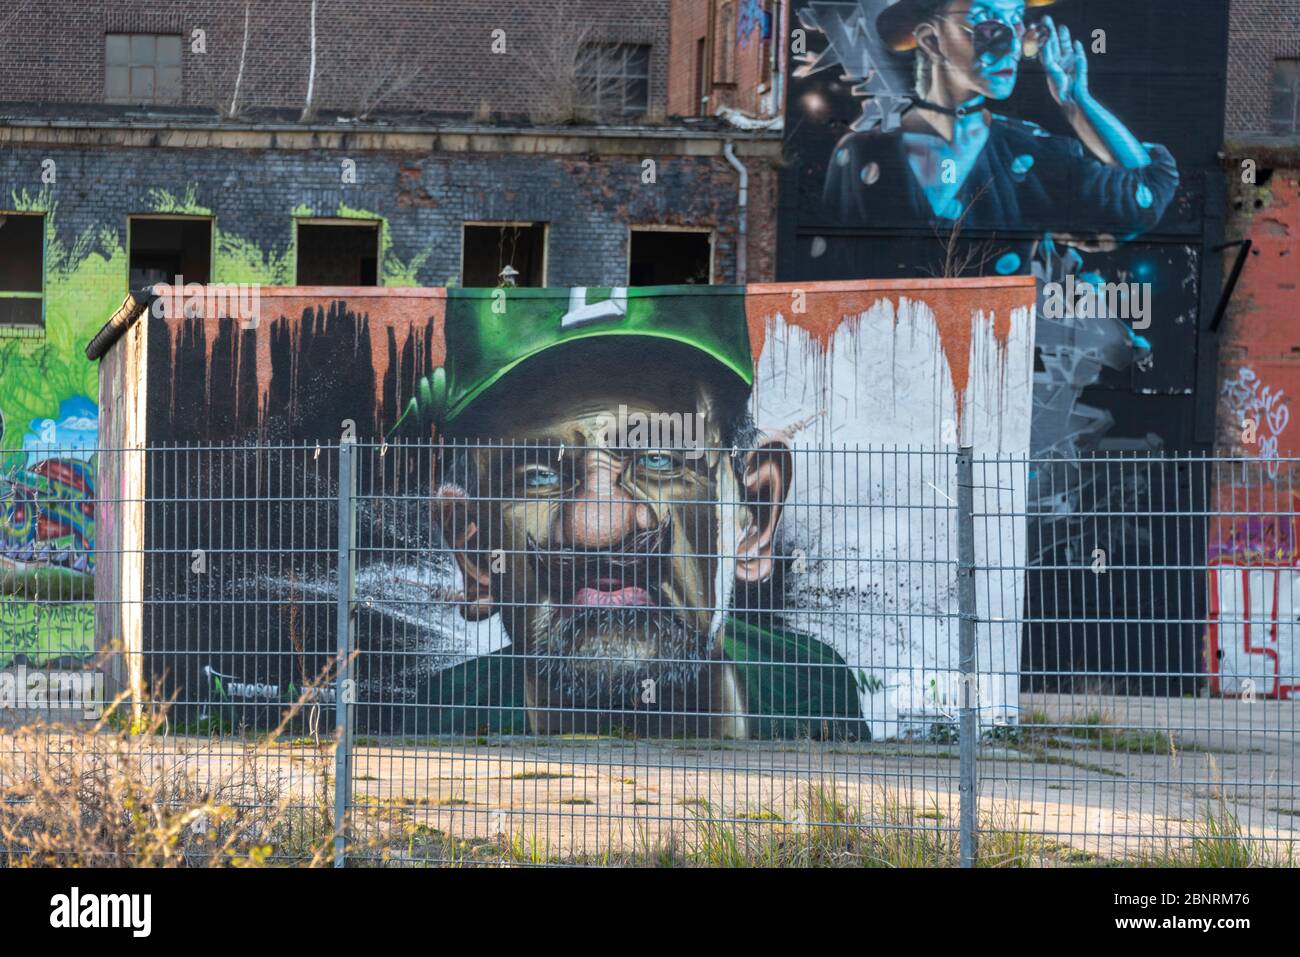 Germany, Saxony-Anhalt, Magdeburg, view of a graffitti painting in the aerosol arena in Magdeburg. The former bread and pasta factory has been attracting graffiti artists from all over Germany for years. Stock Photo